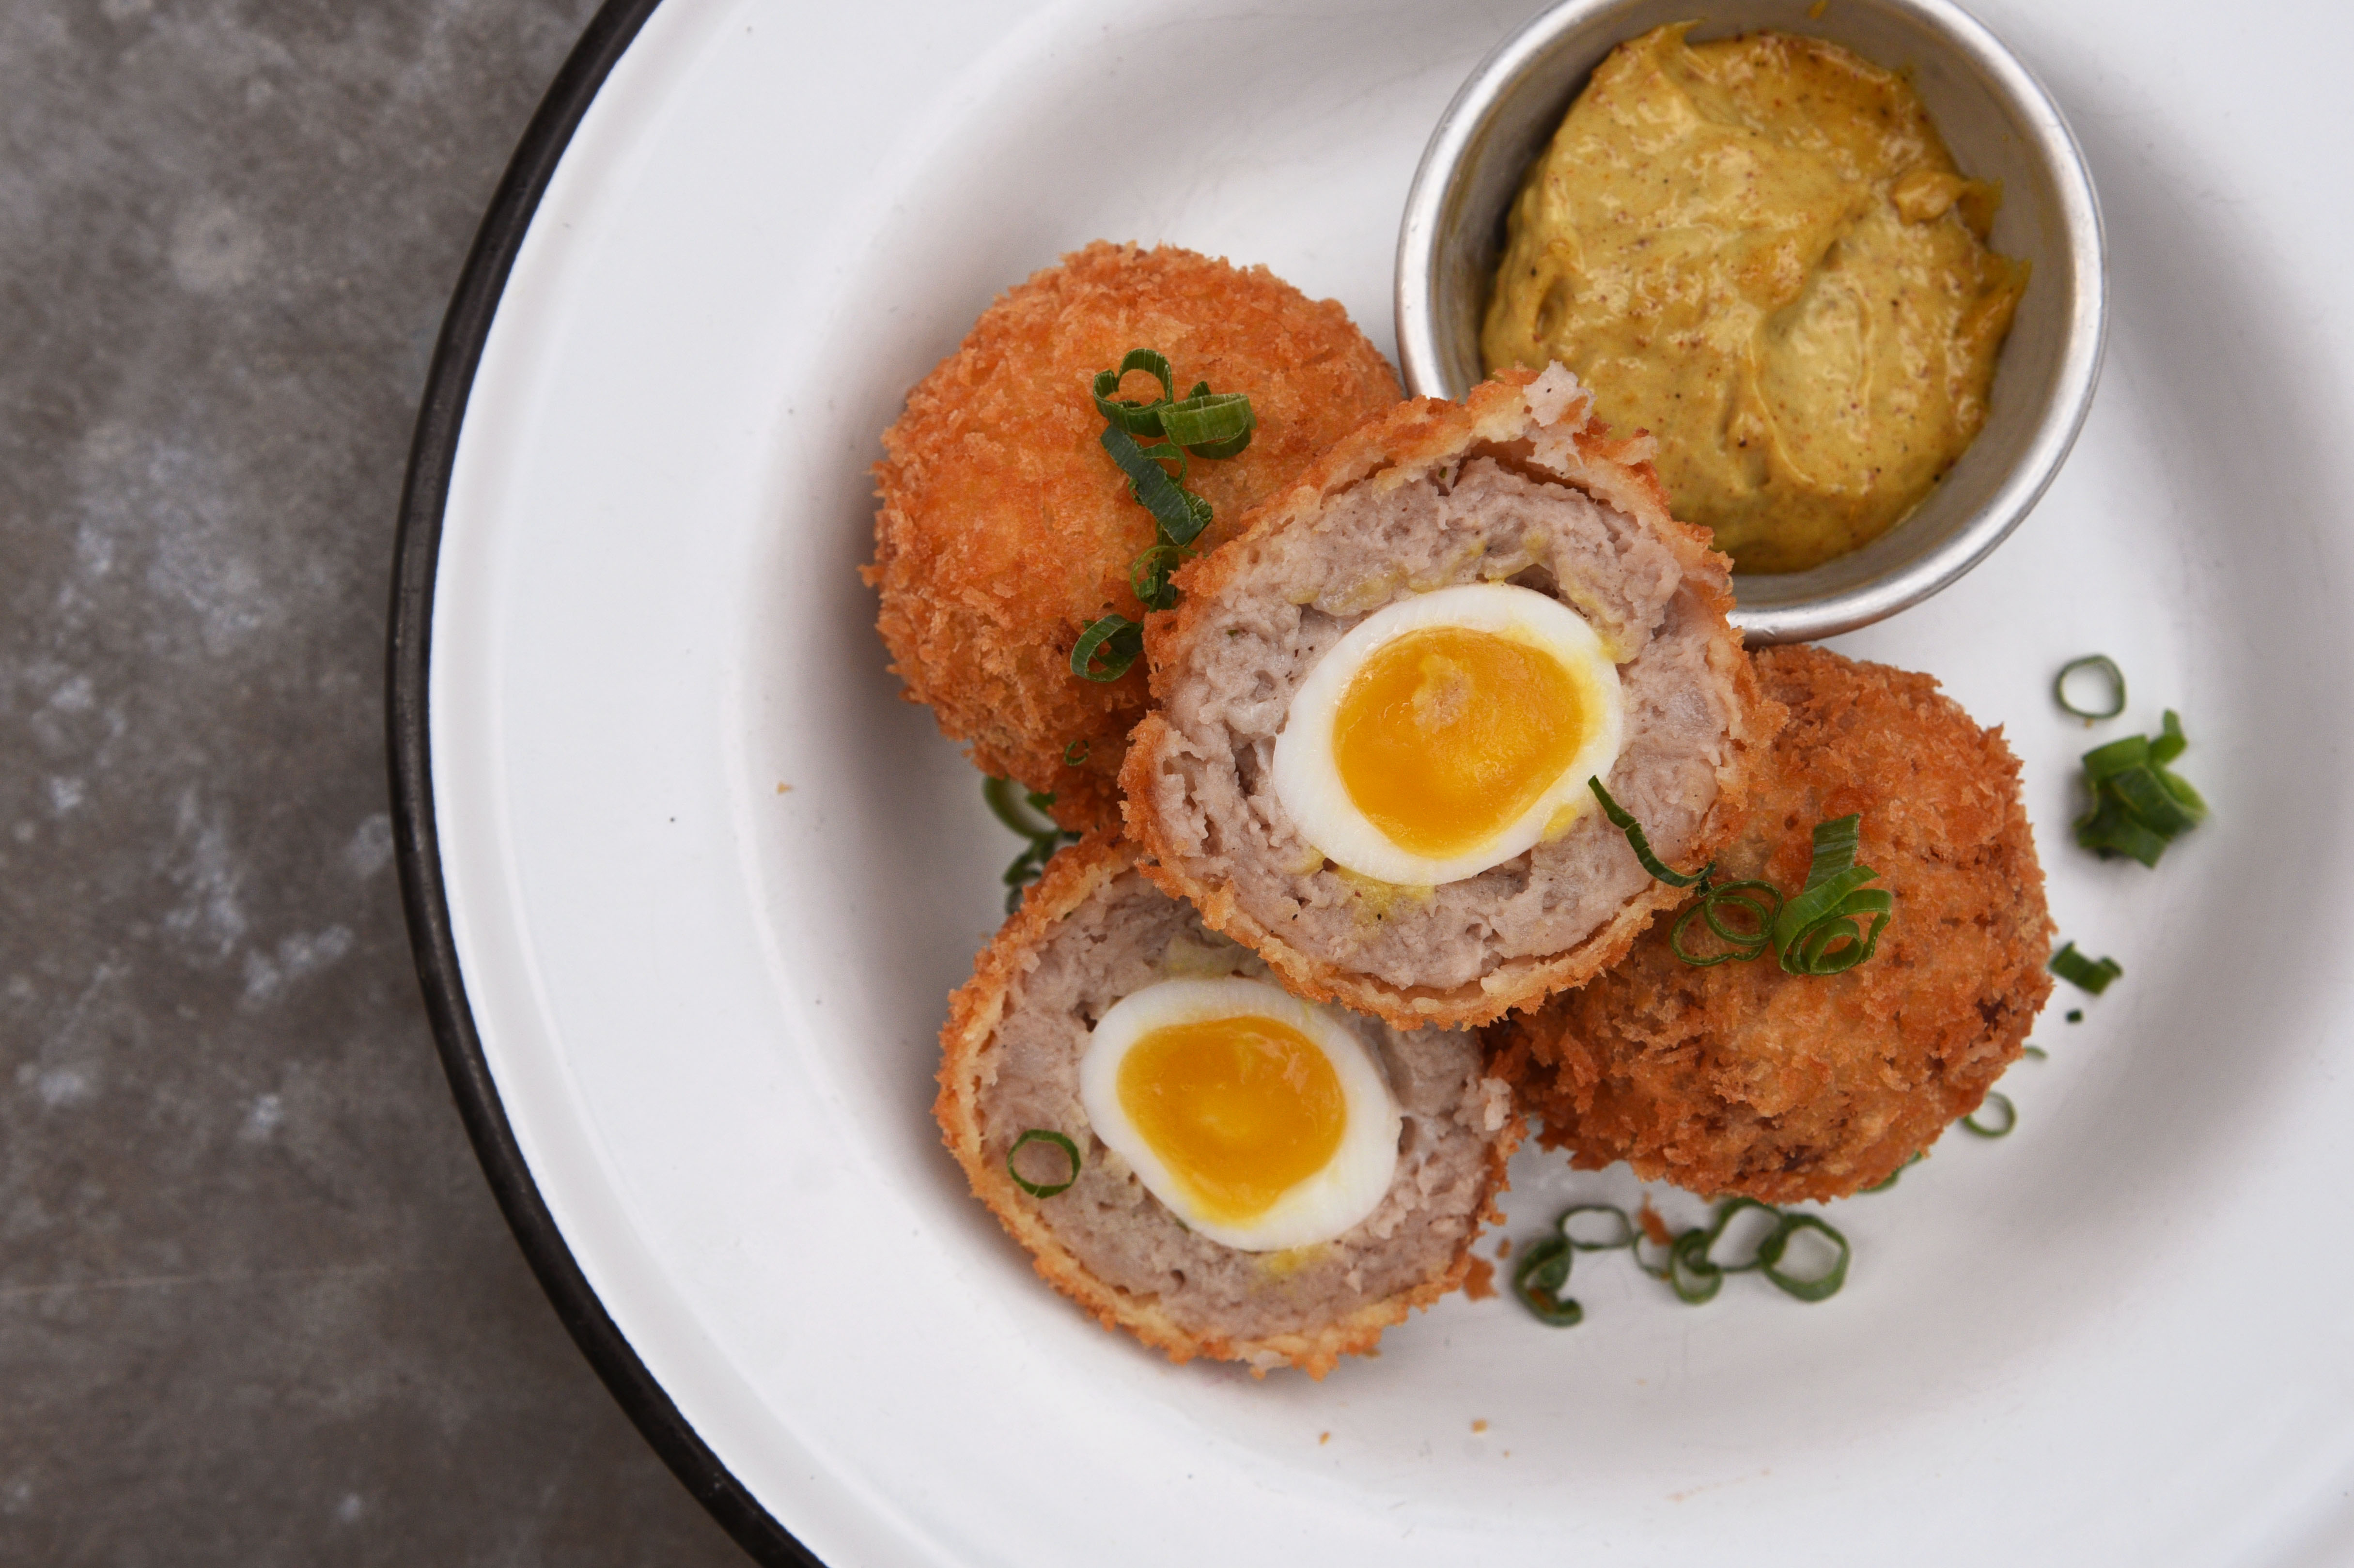 We love the curry and Scotch egg pairing at Beef & Liberty